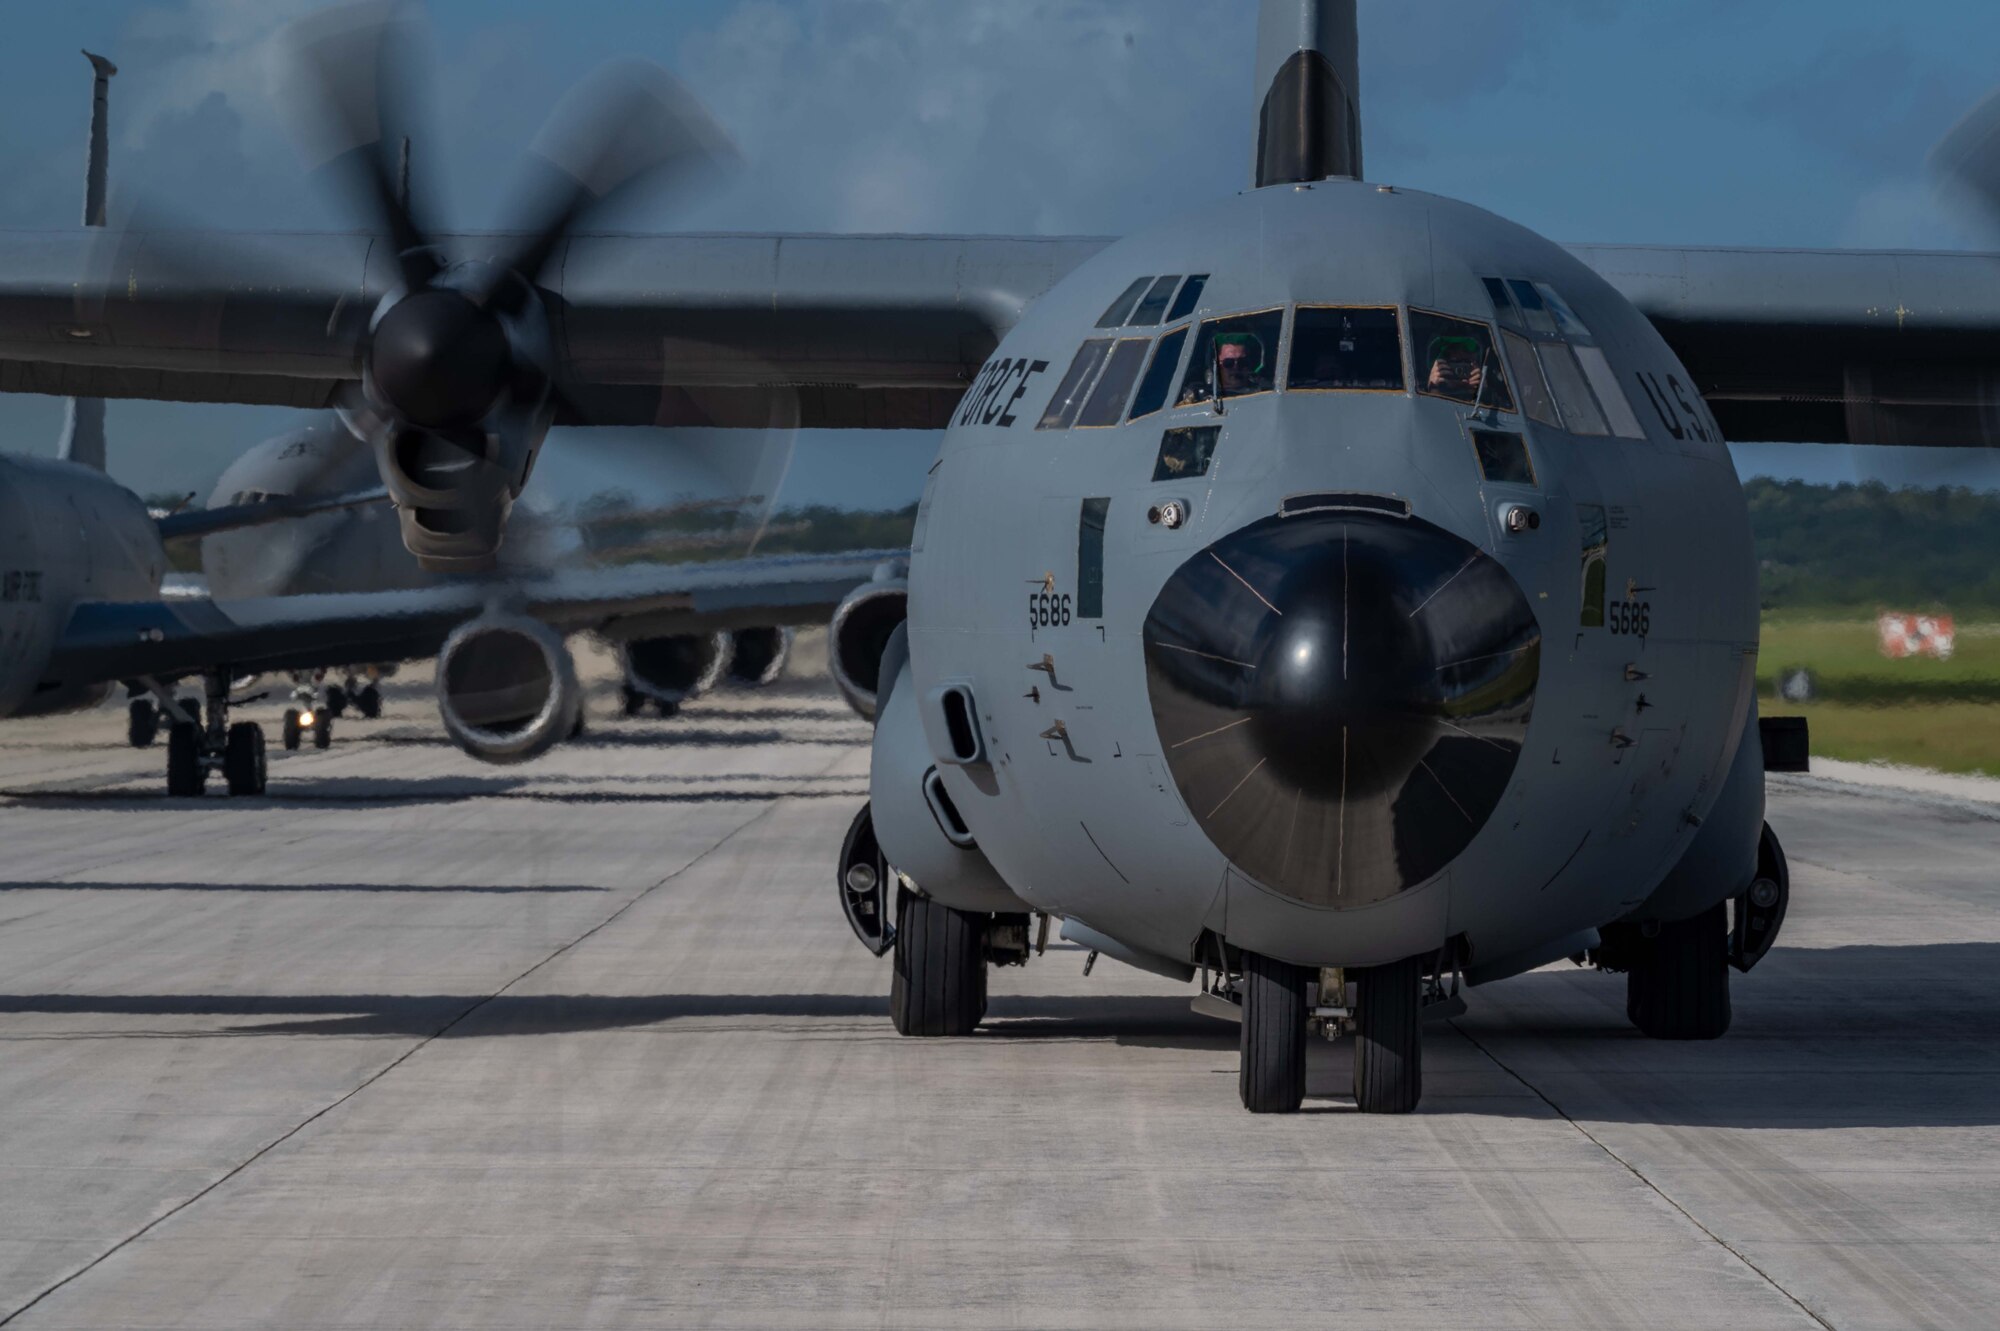 Royal Australian Air Force, U.S. Air Force, and the Japan Air Self-Defense Force aircraft participate in an elephant walk, during exercise Cope North 22 at Andersen Air Force Base, Guam, Feb. 5, 2022.